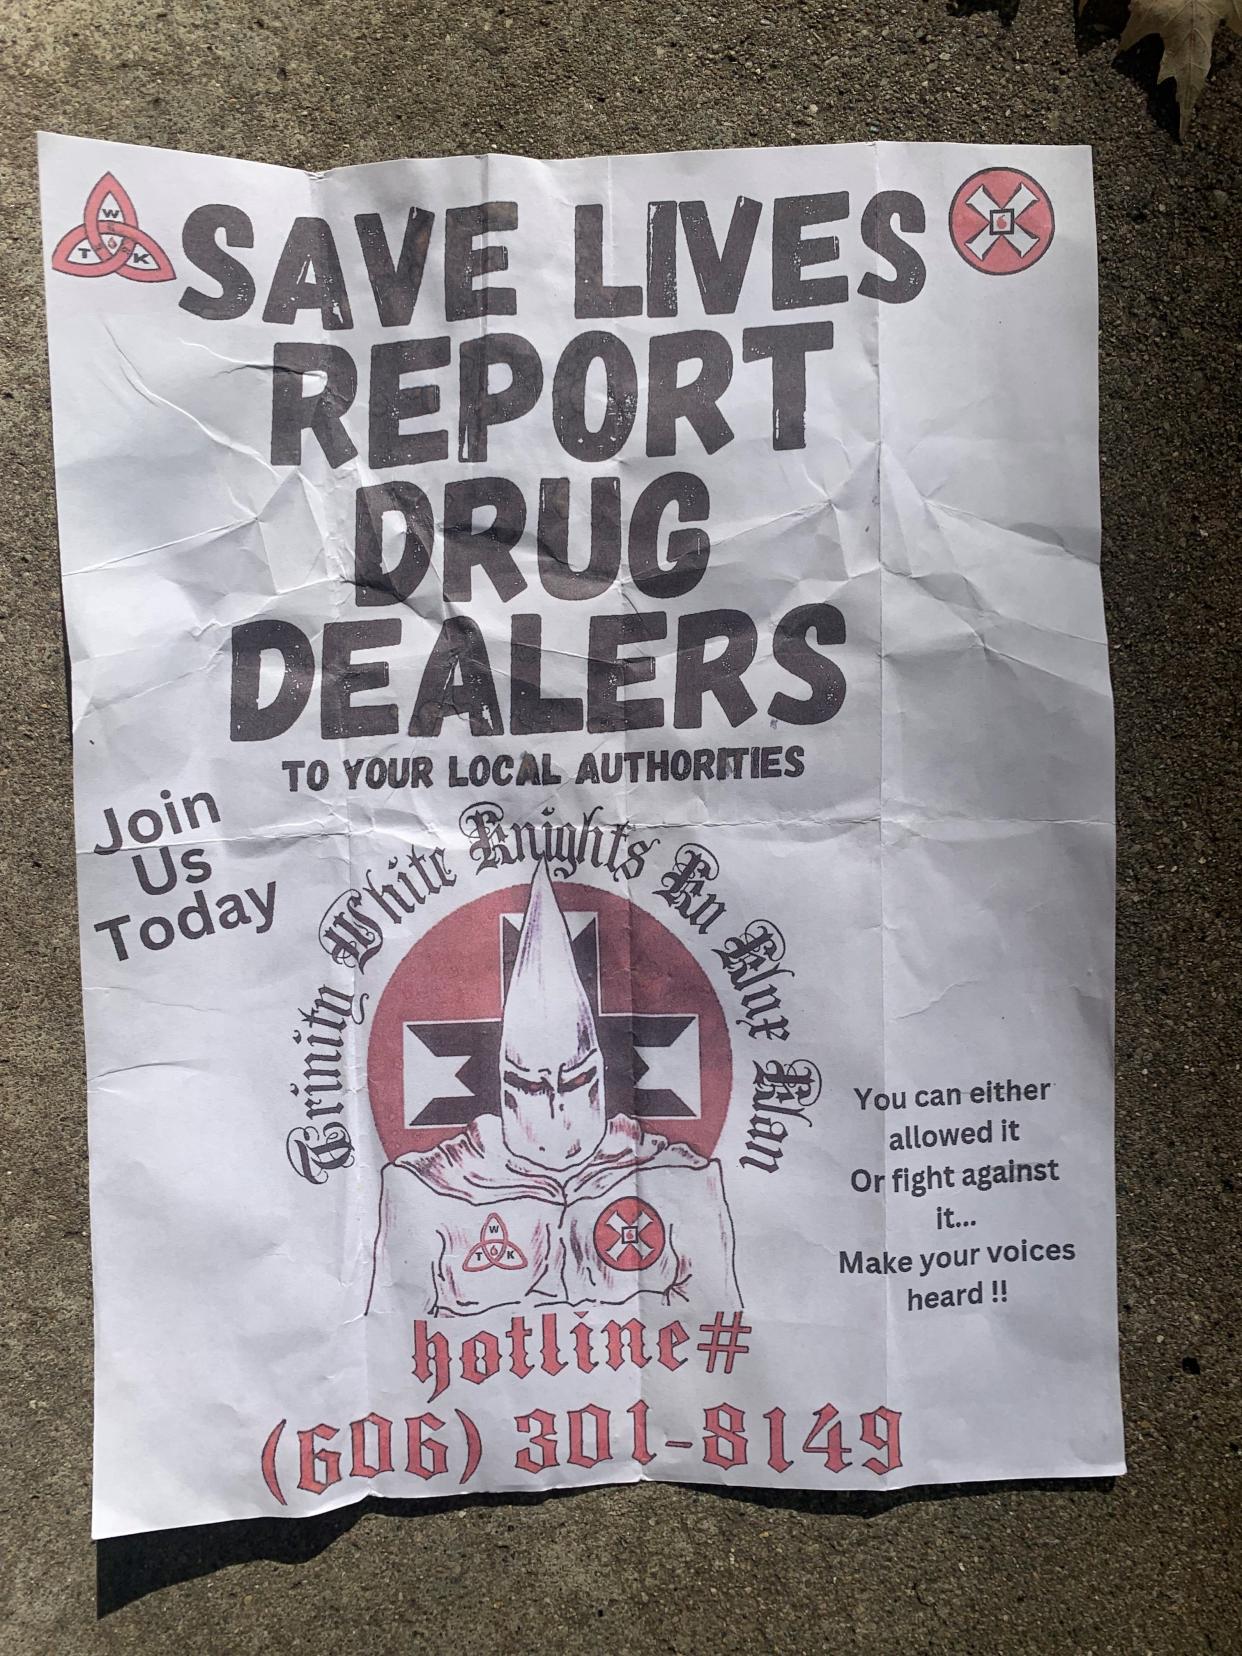 KKK flyers were dropped at homes in Carmel and Fishers